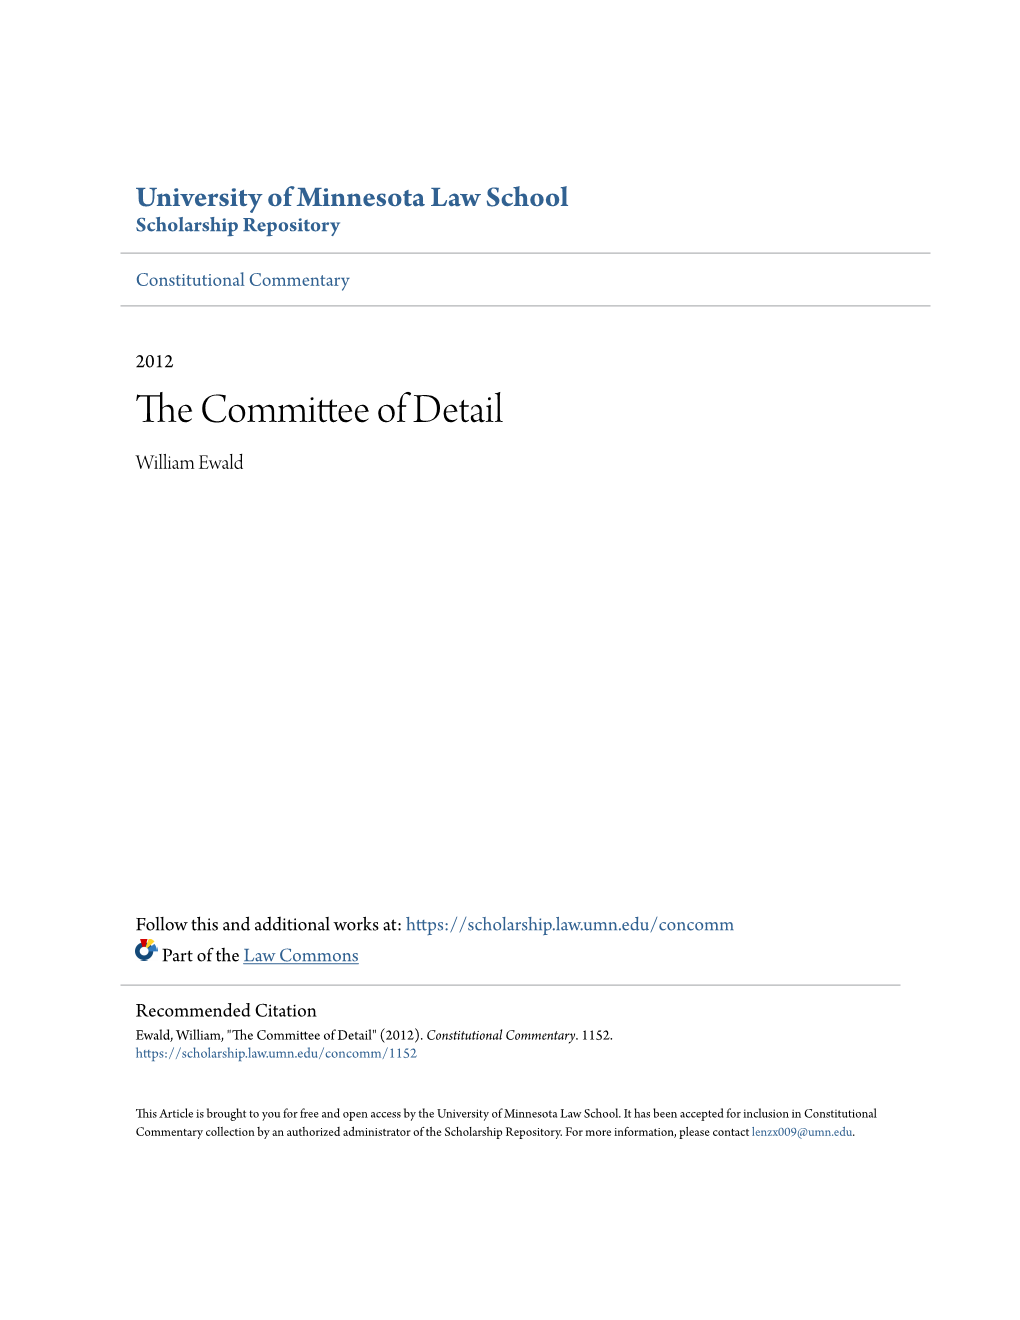 The Committee of Detail